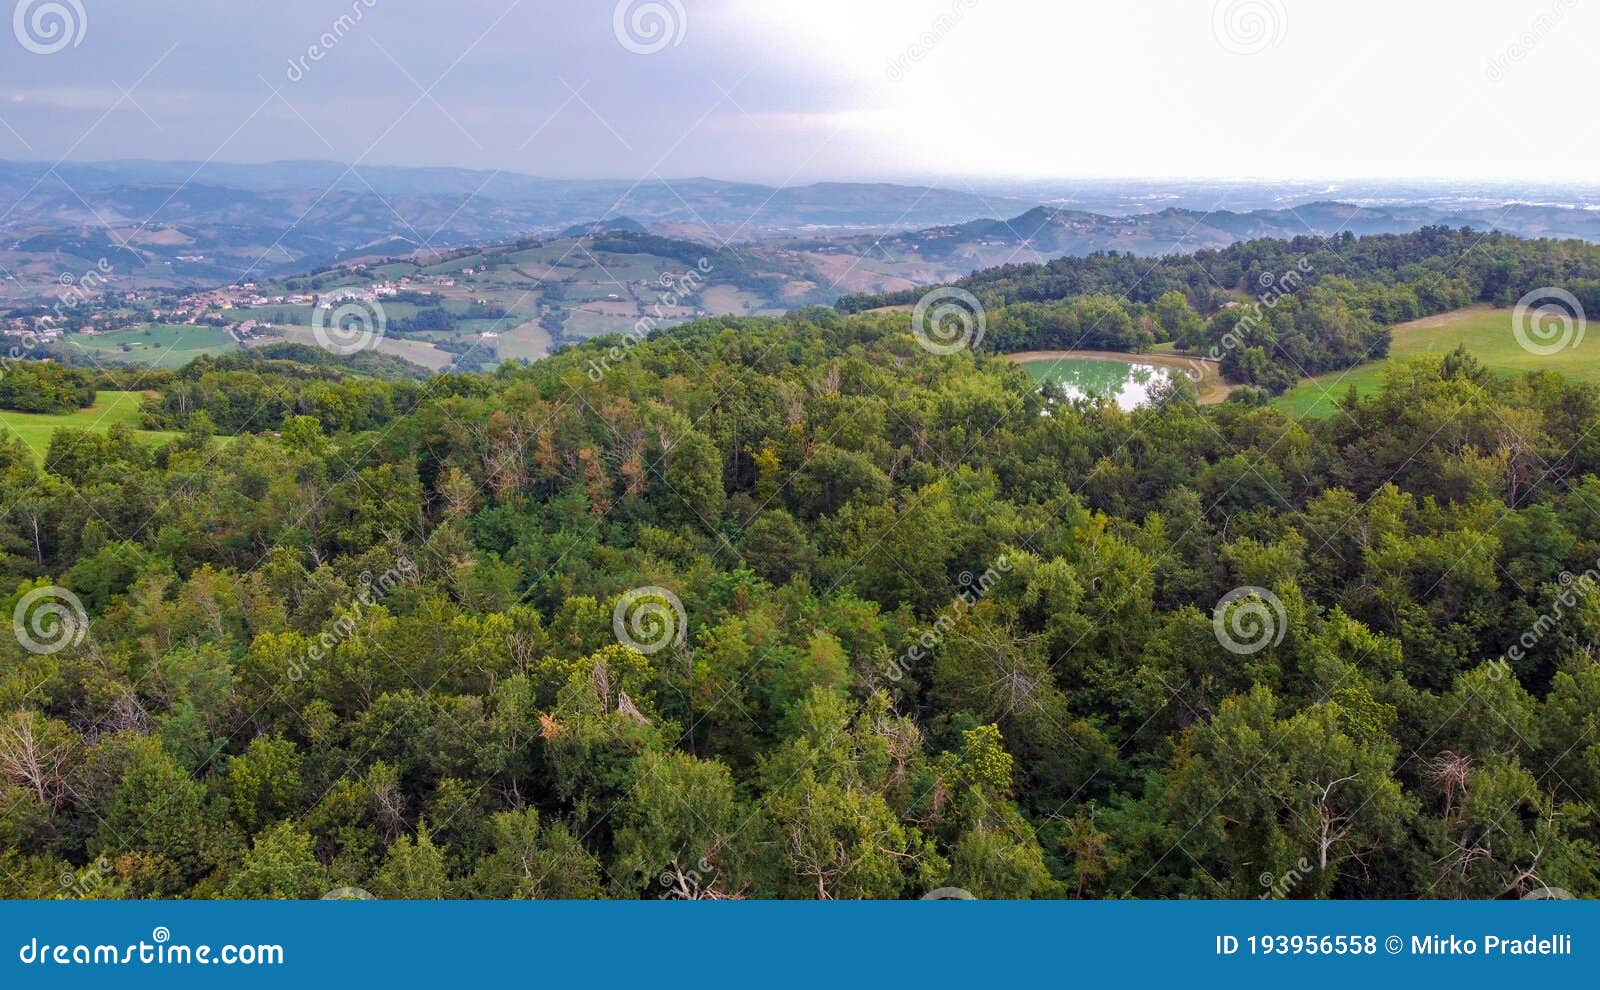 aerial view of woods and hills in italian appennini